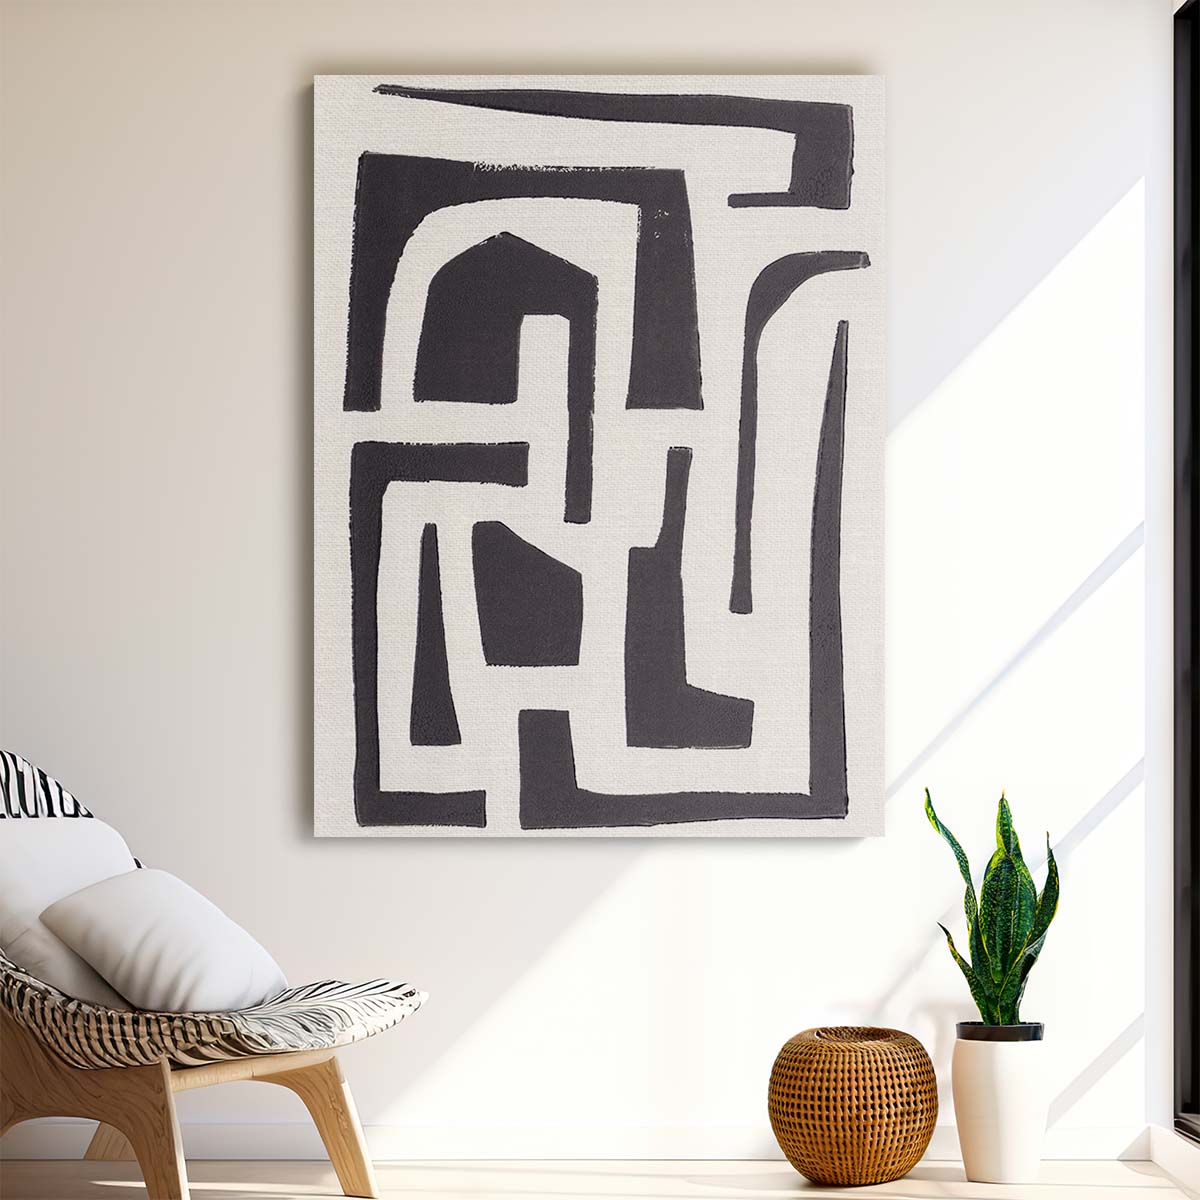 Modern Black and White Abstract City Linocut Wall Art Illustration by Luxuriance Designs, made in USA